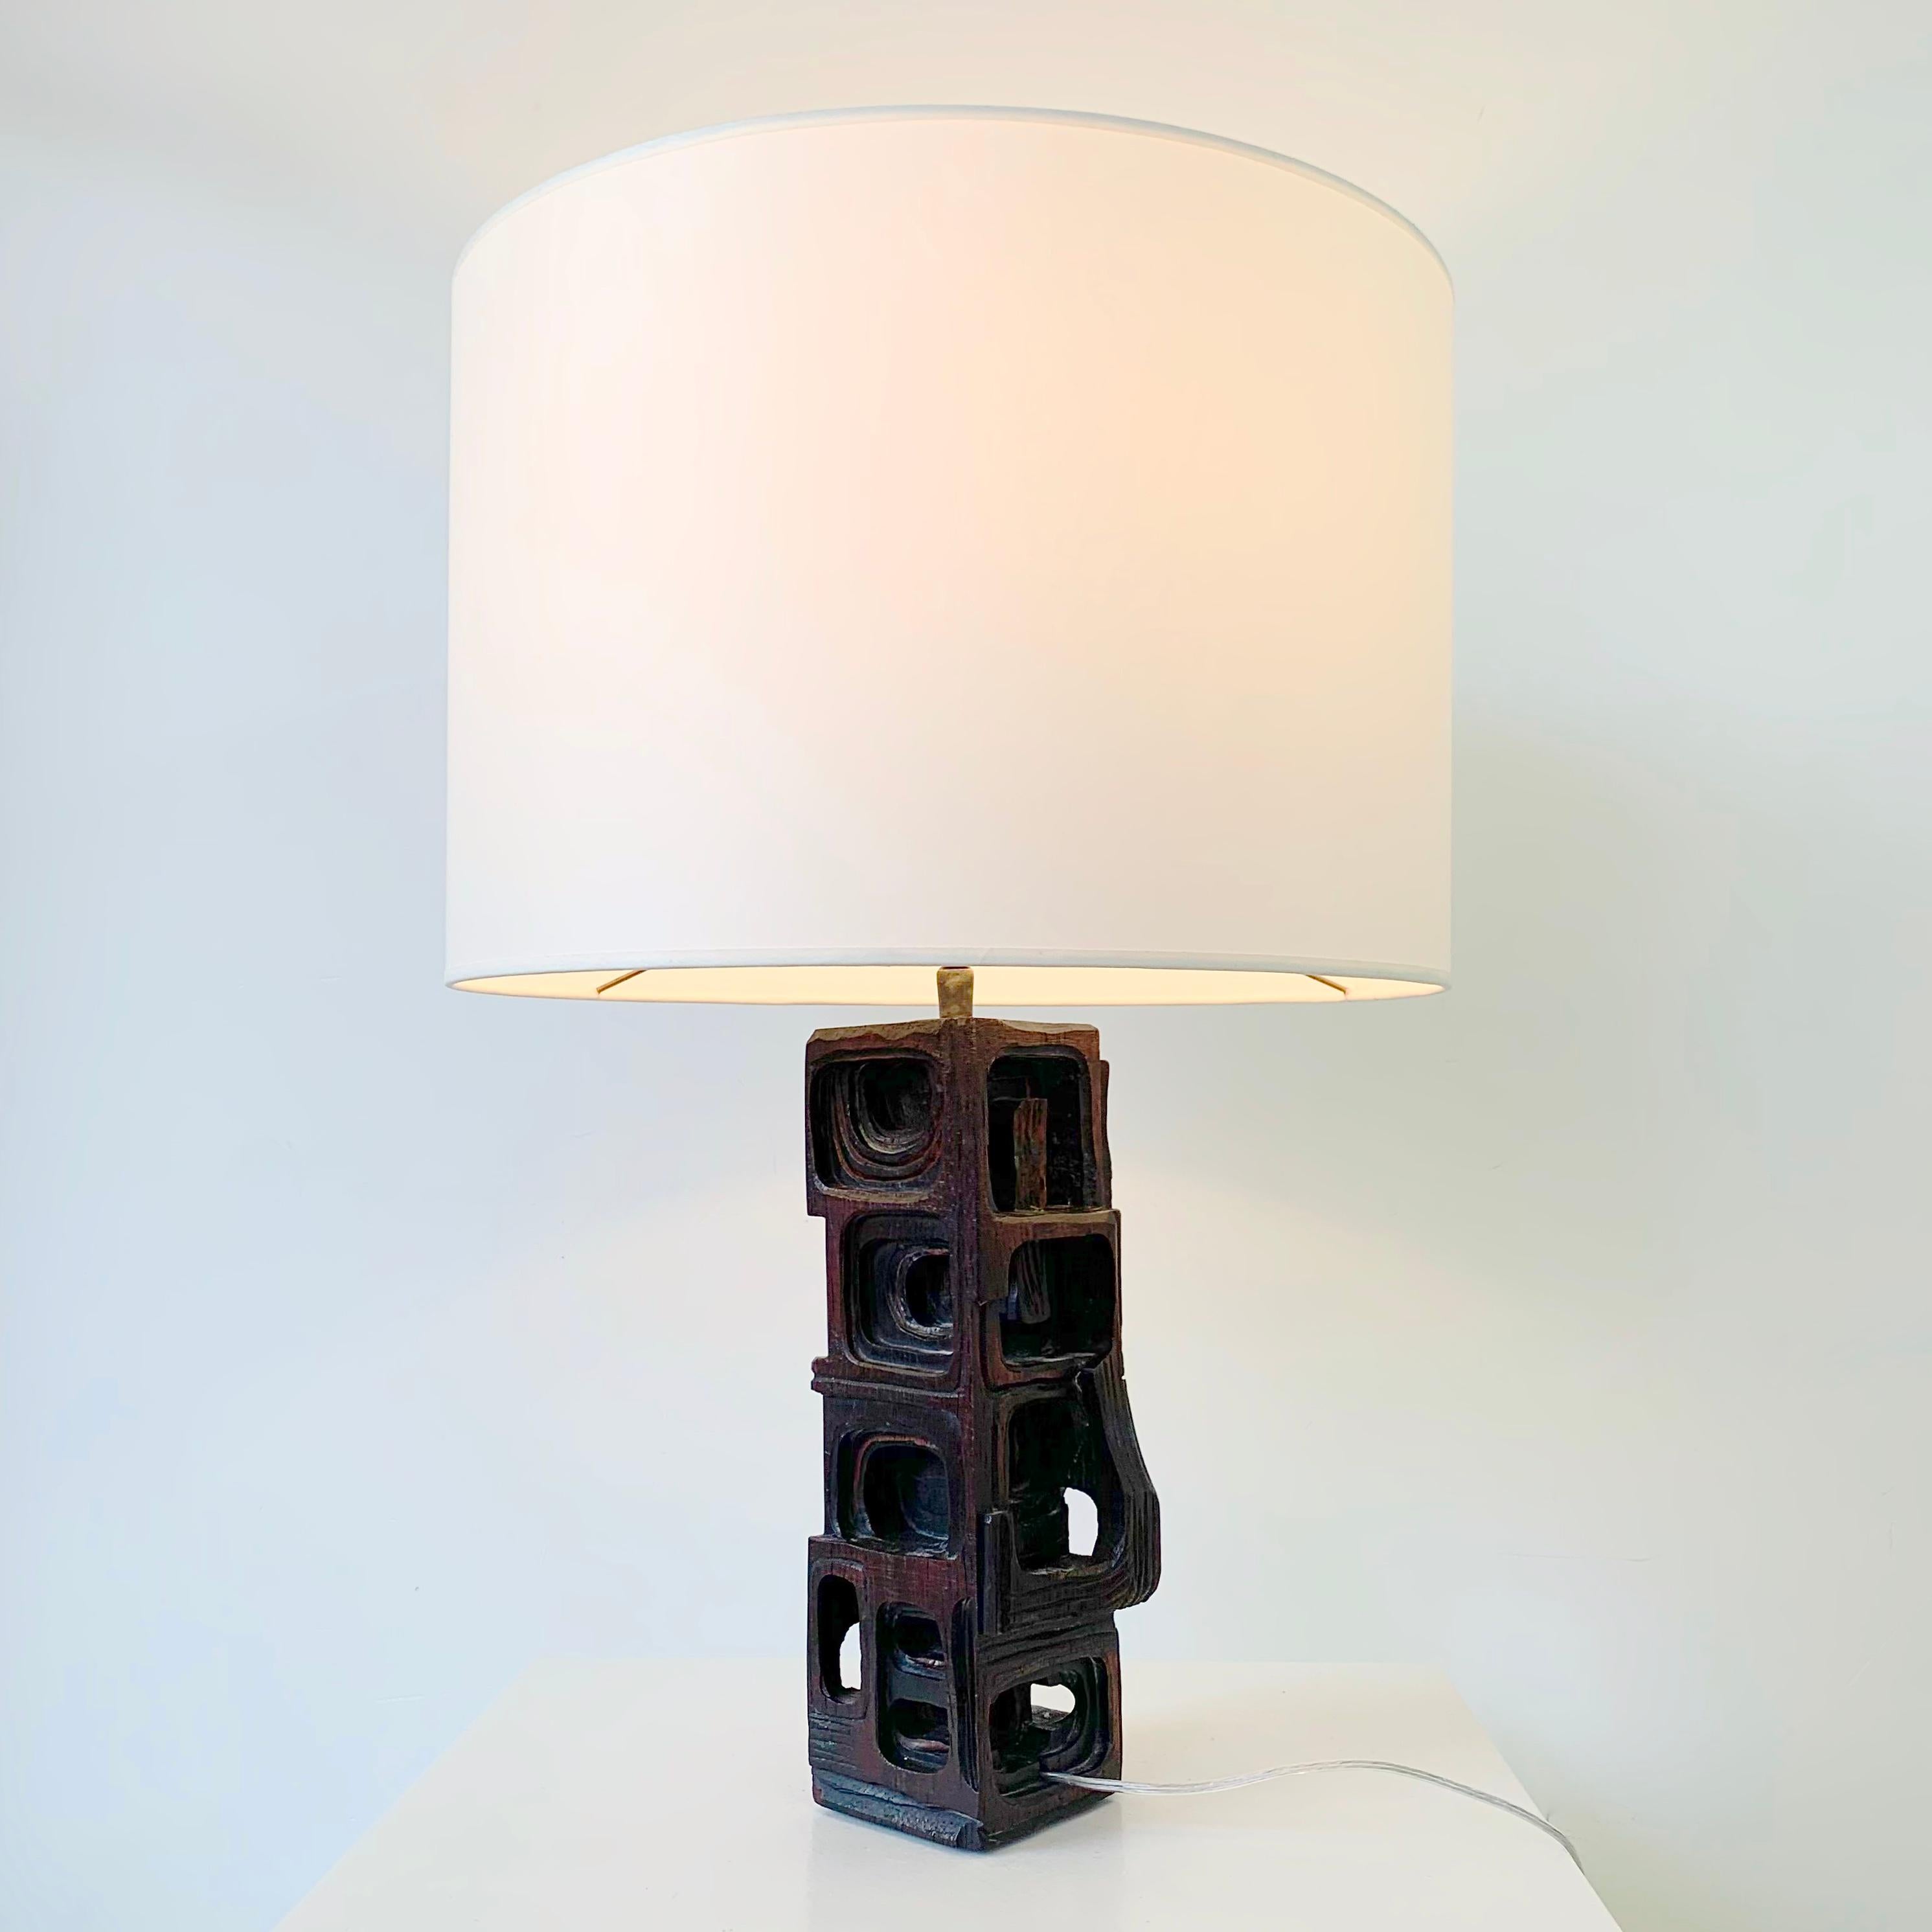 Hand-Carved Sculptural Hand Carved Table Lamp by Gianni Pinna, c.1970, Italy.